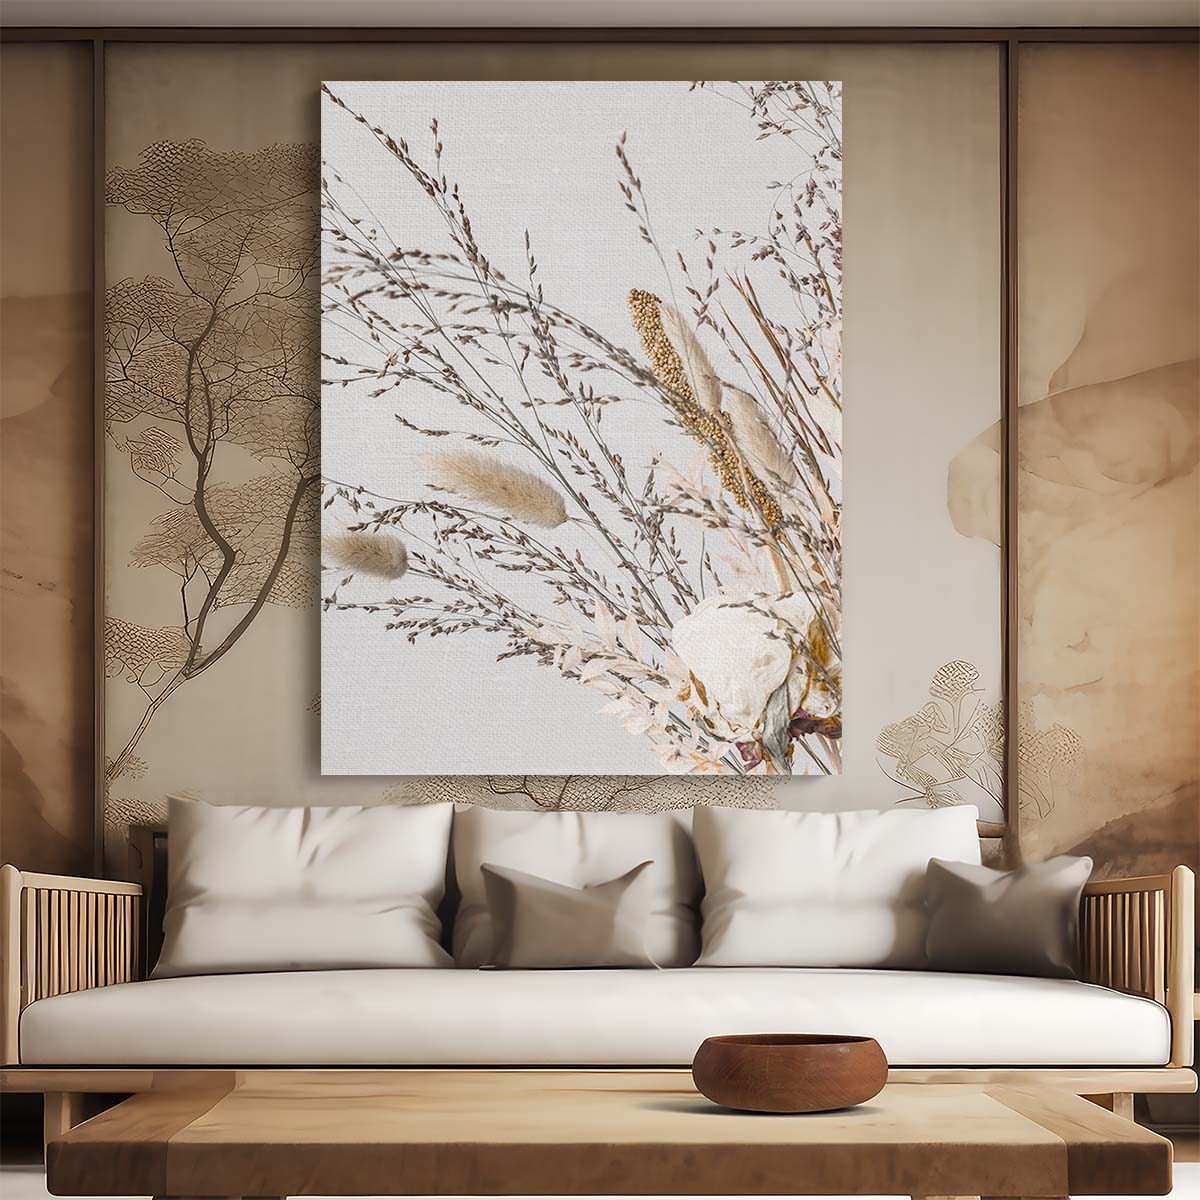 Autumn Botanical Photography Dried Floral Still Life on Grey by Luxuriance Designs, made in USA